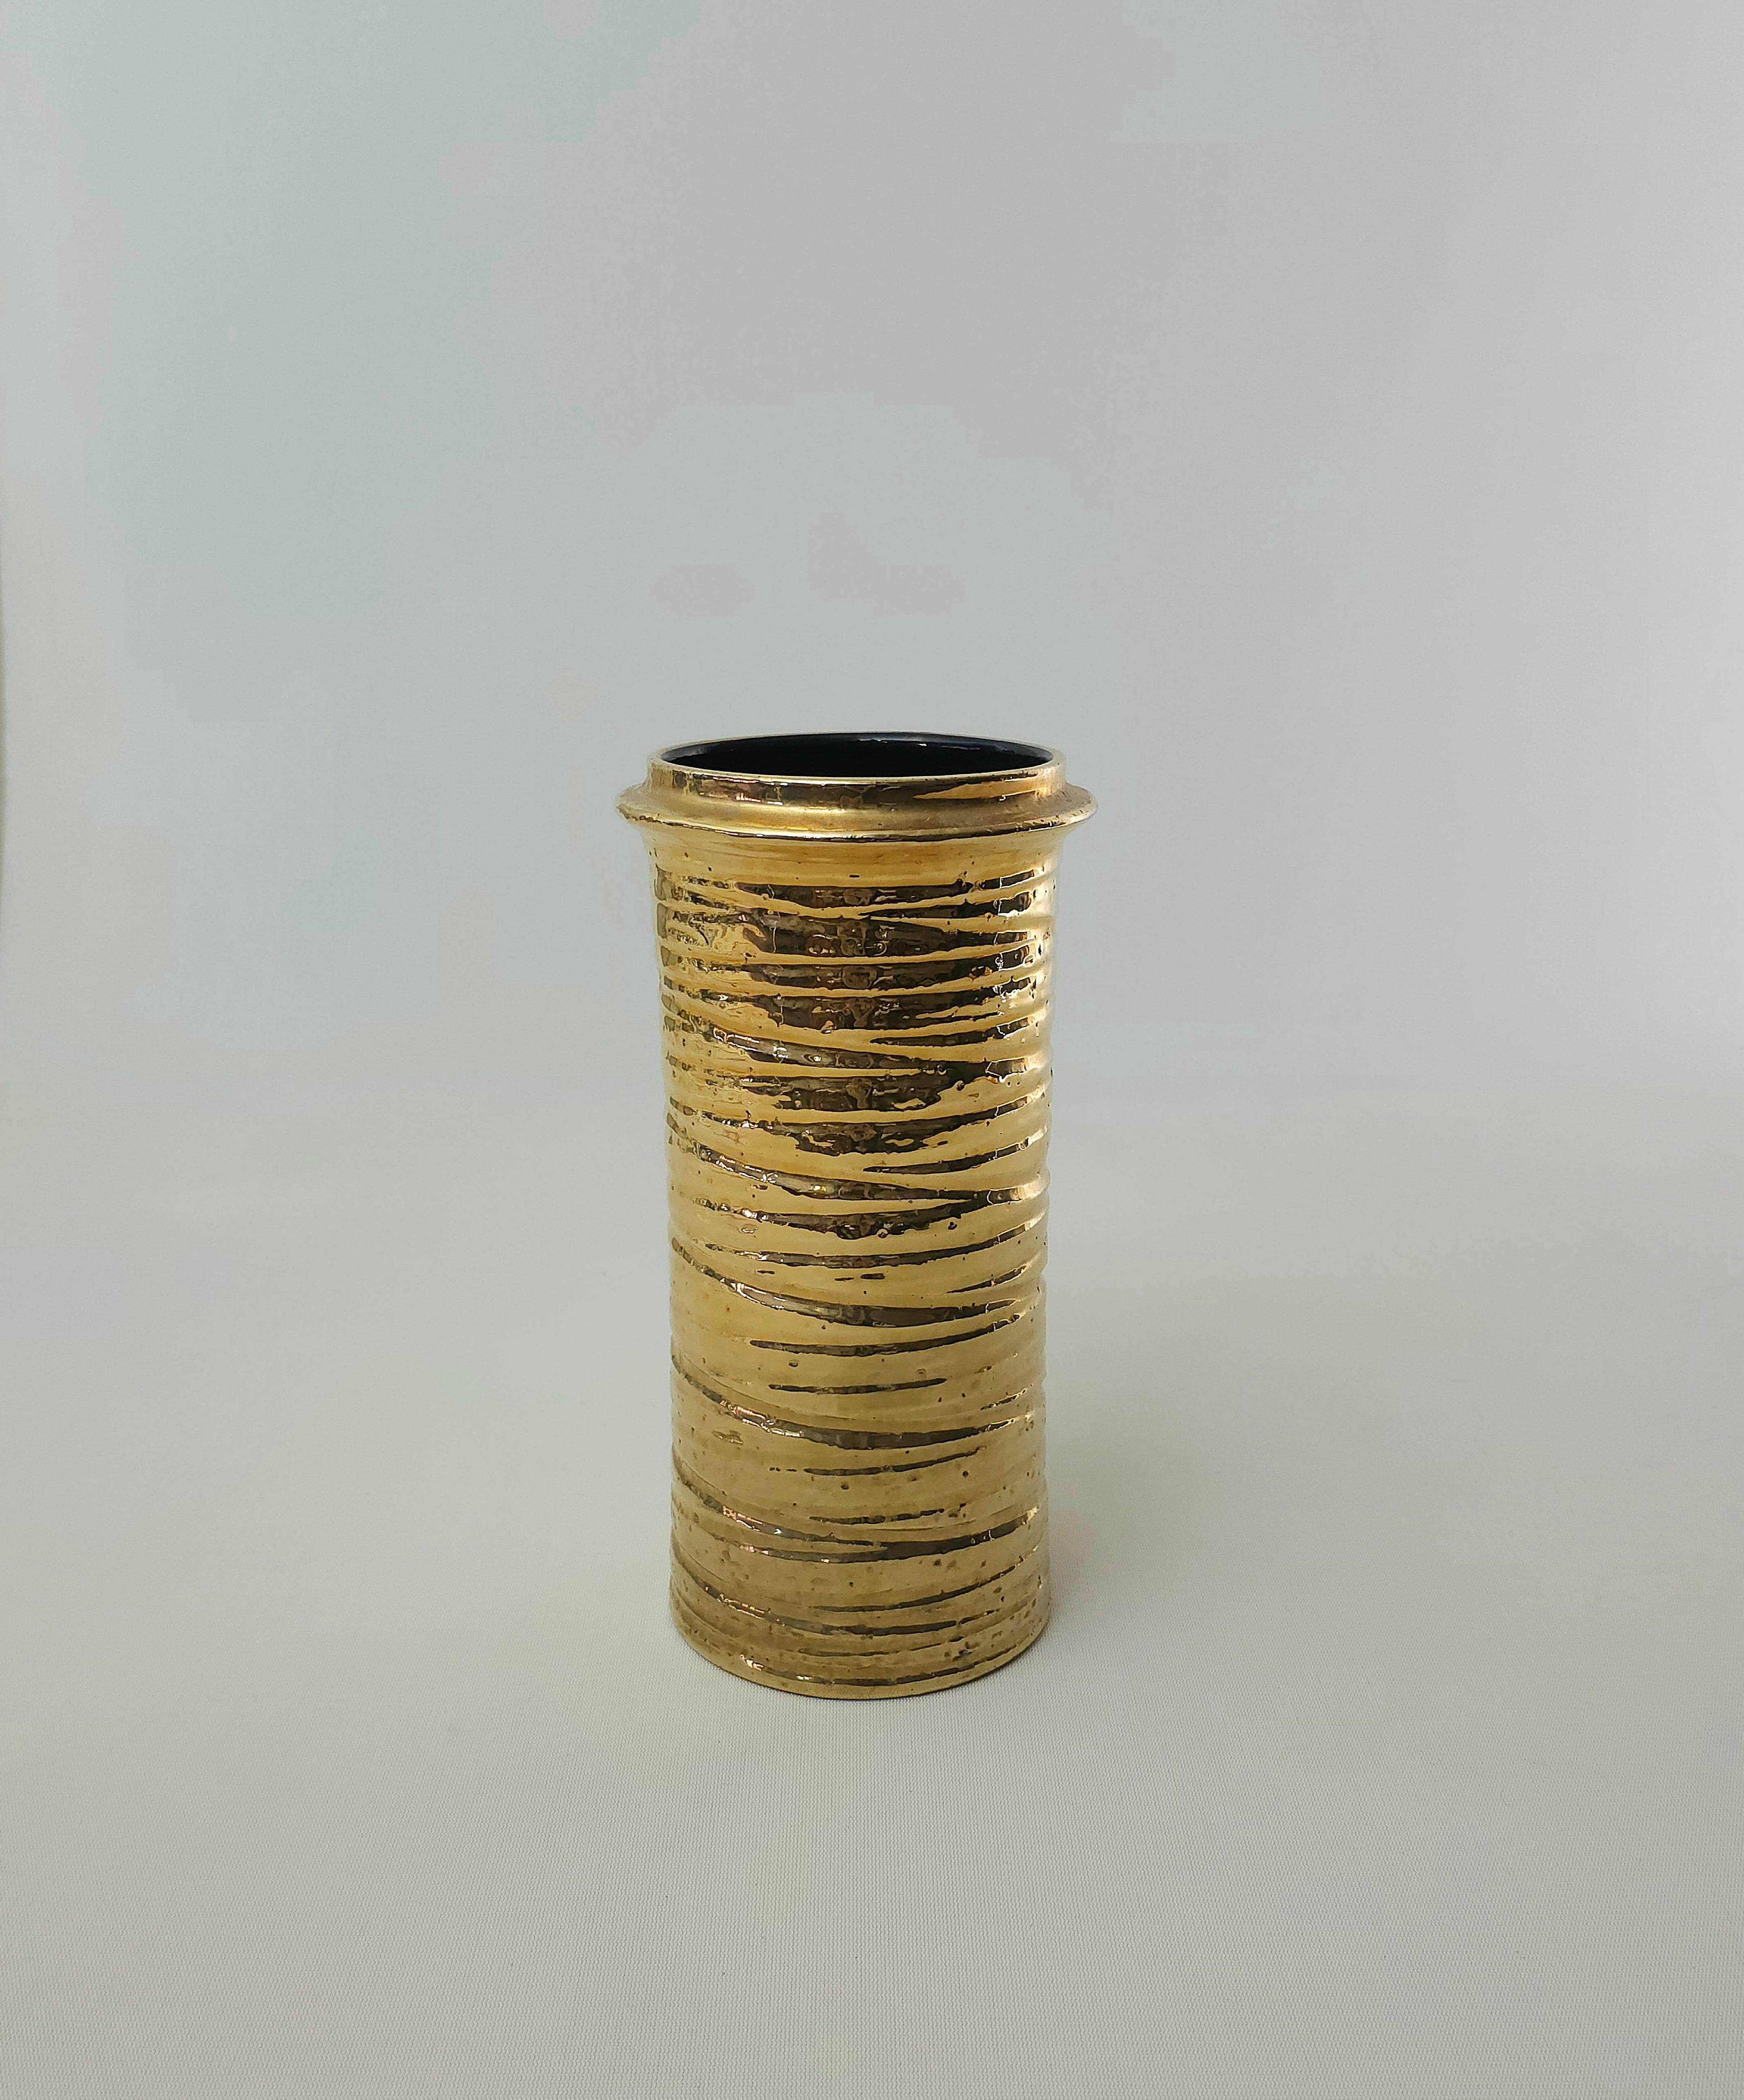 Rare set of a circular vide-poche and a cylindrical vase made of golden glazed ceramic with a particular dotted and striated workmanship. Gabrielle Crespi/Tommaso Barbi style, 60s Italy. (we recommend these two pieces)



Note: We try to offer our